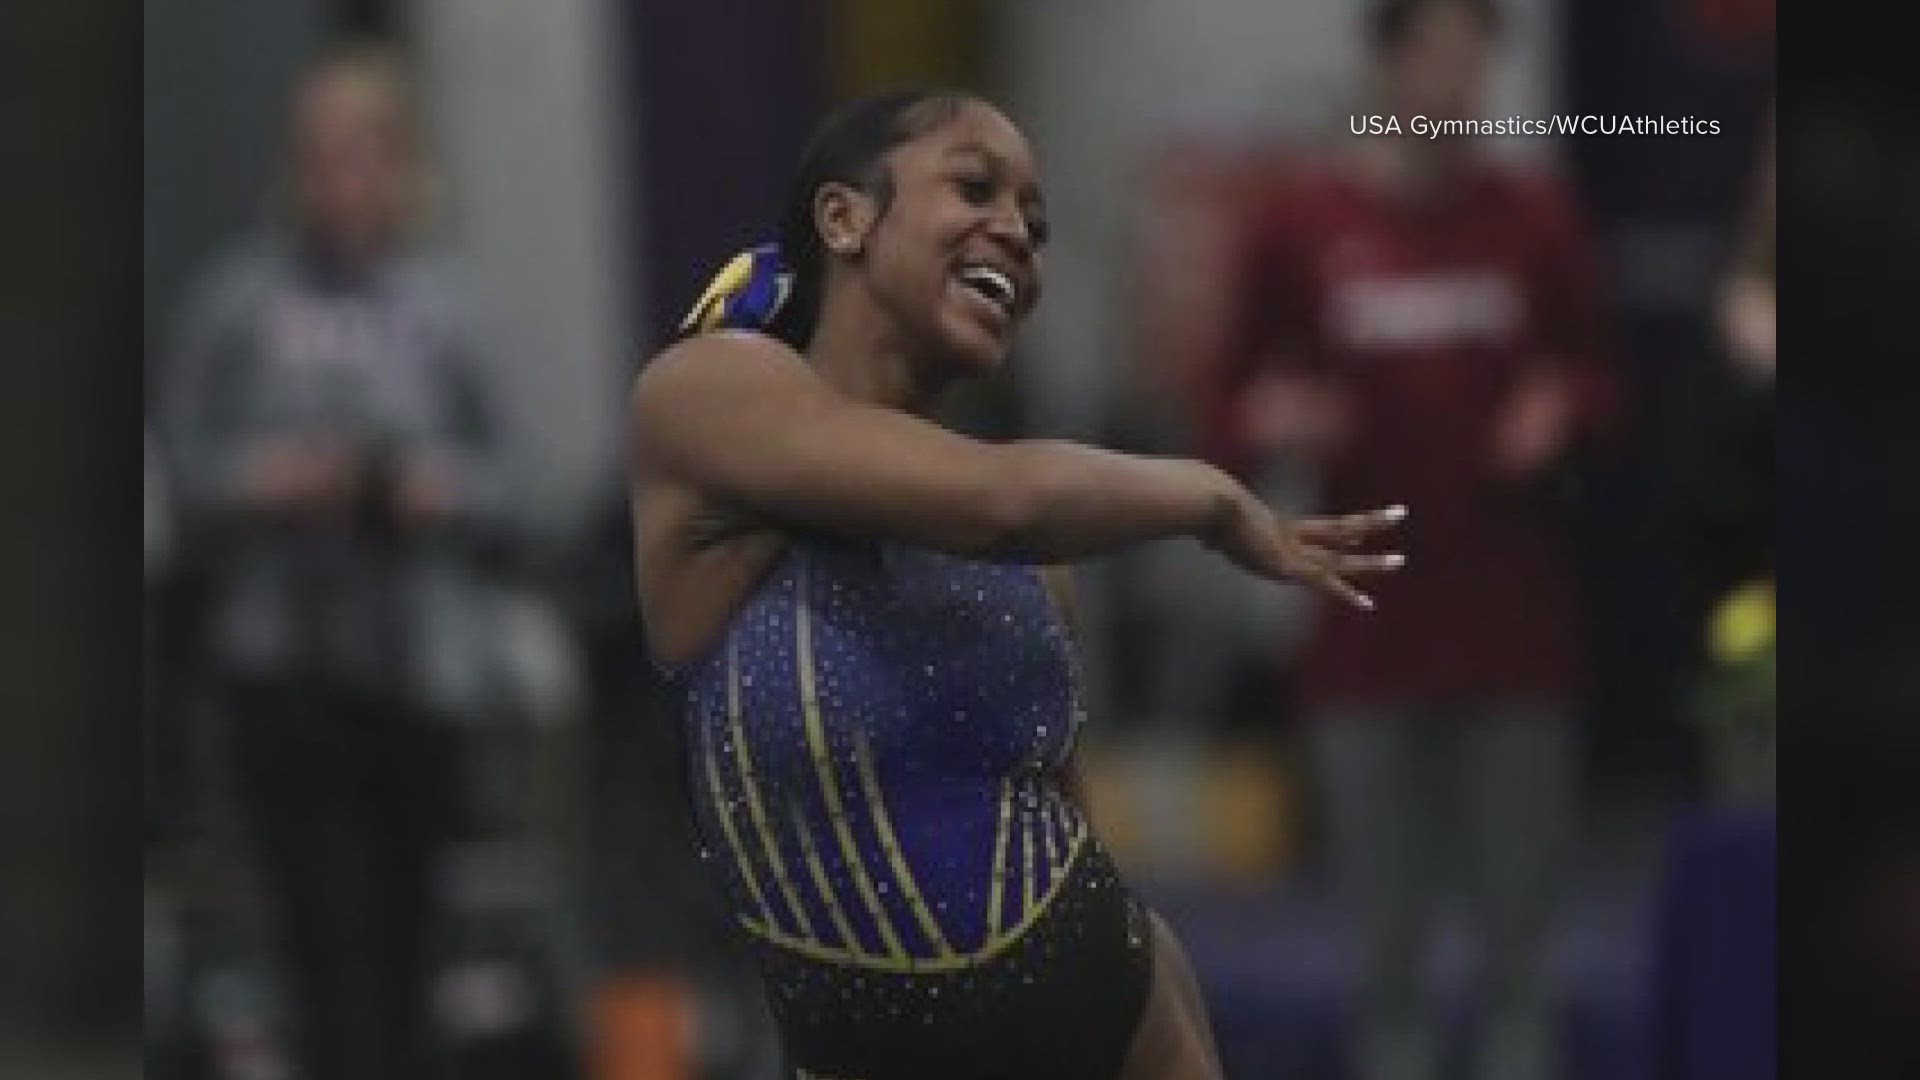 Fisk University’s Morgan Price, part of the first HBCU gymnastics team, made history by winning the United States Gymnastics Collegiate National title.